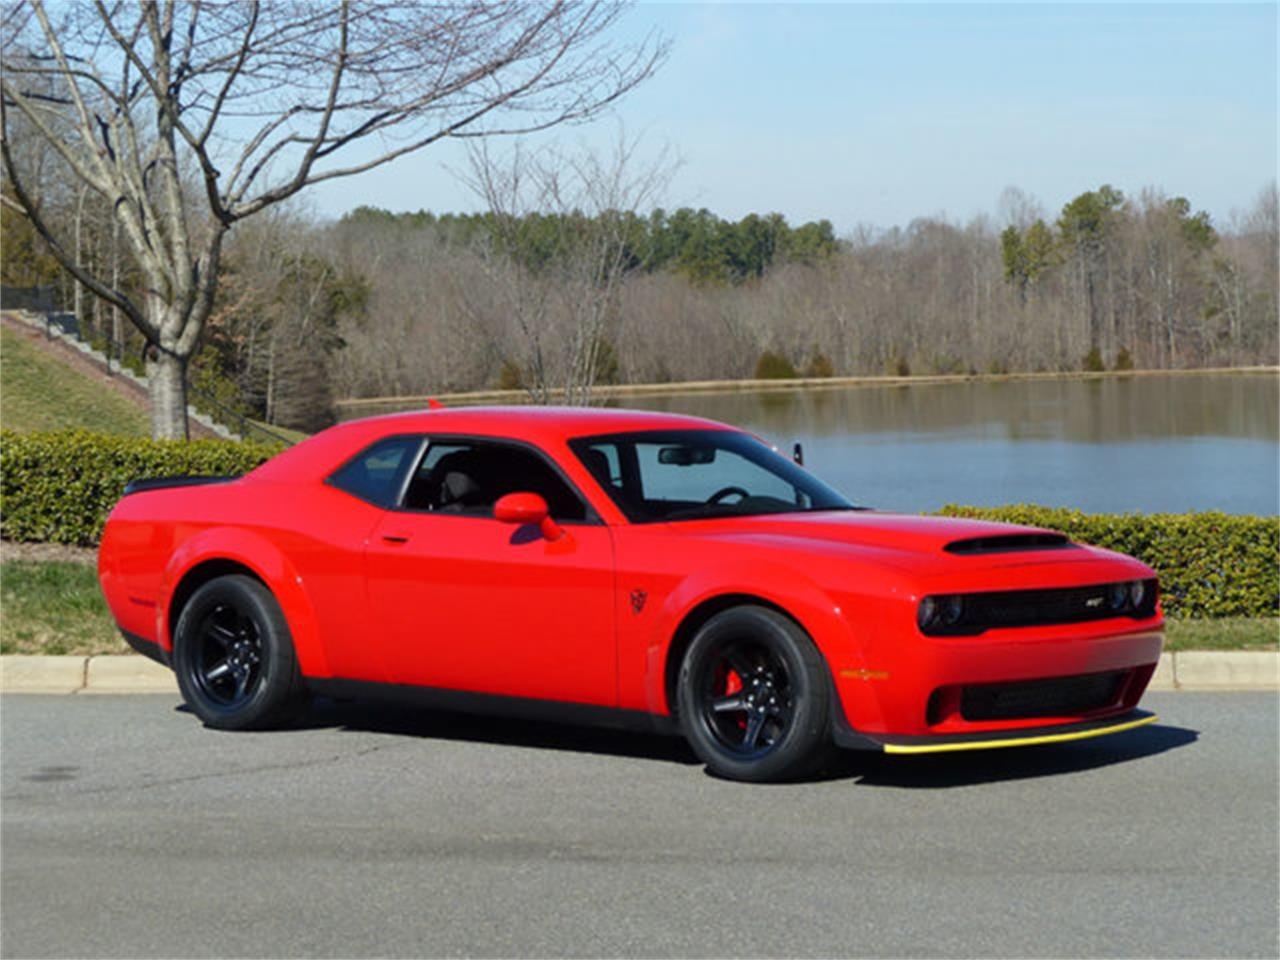 2018 Dodge Demon for sale in Charlotte, NC